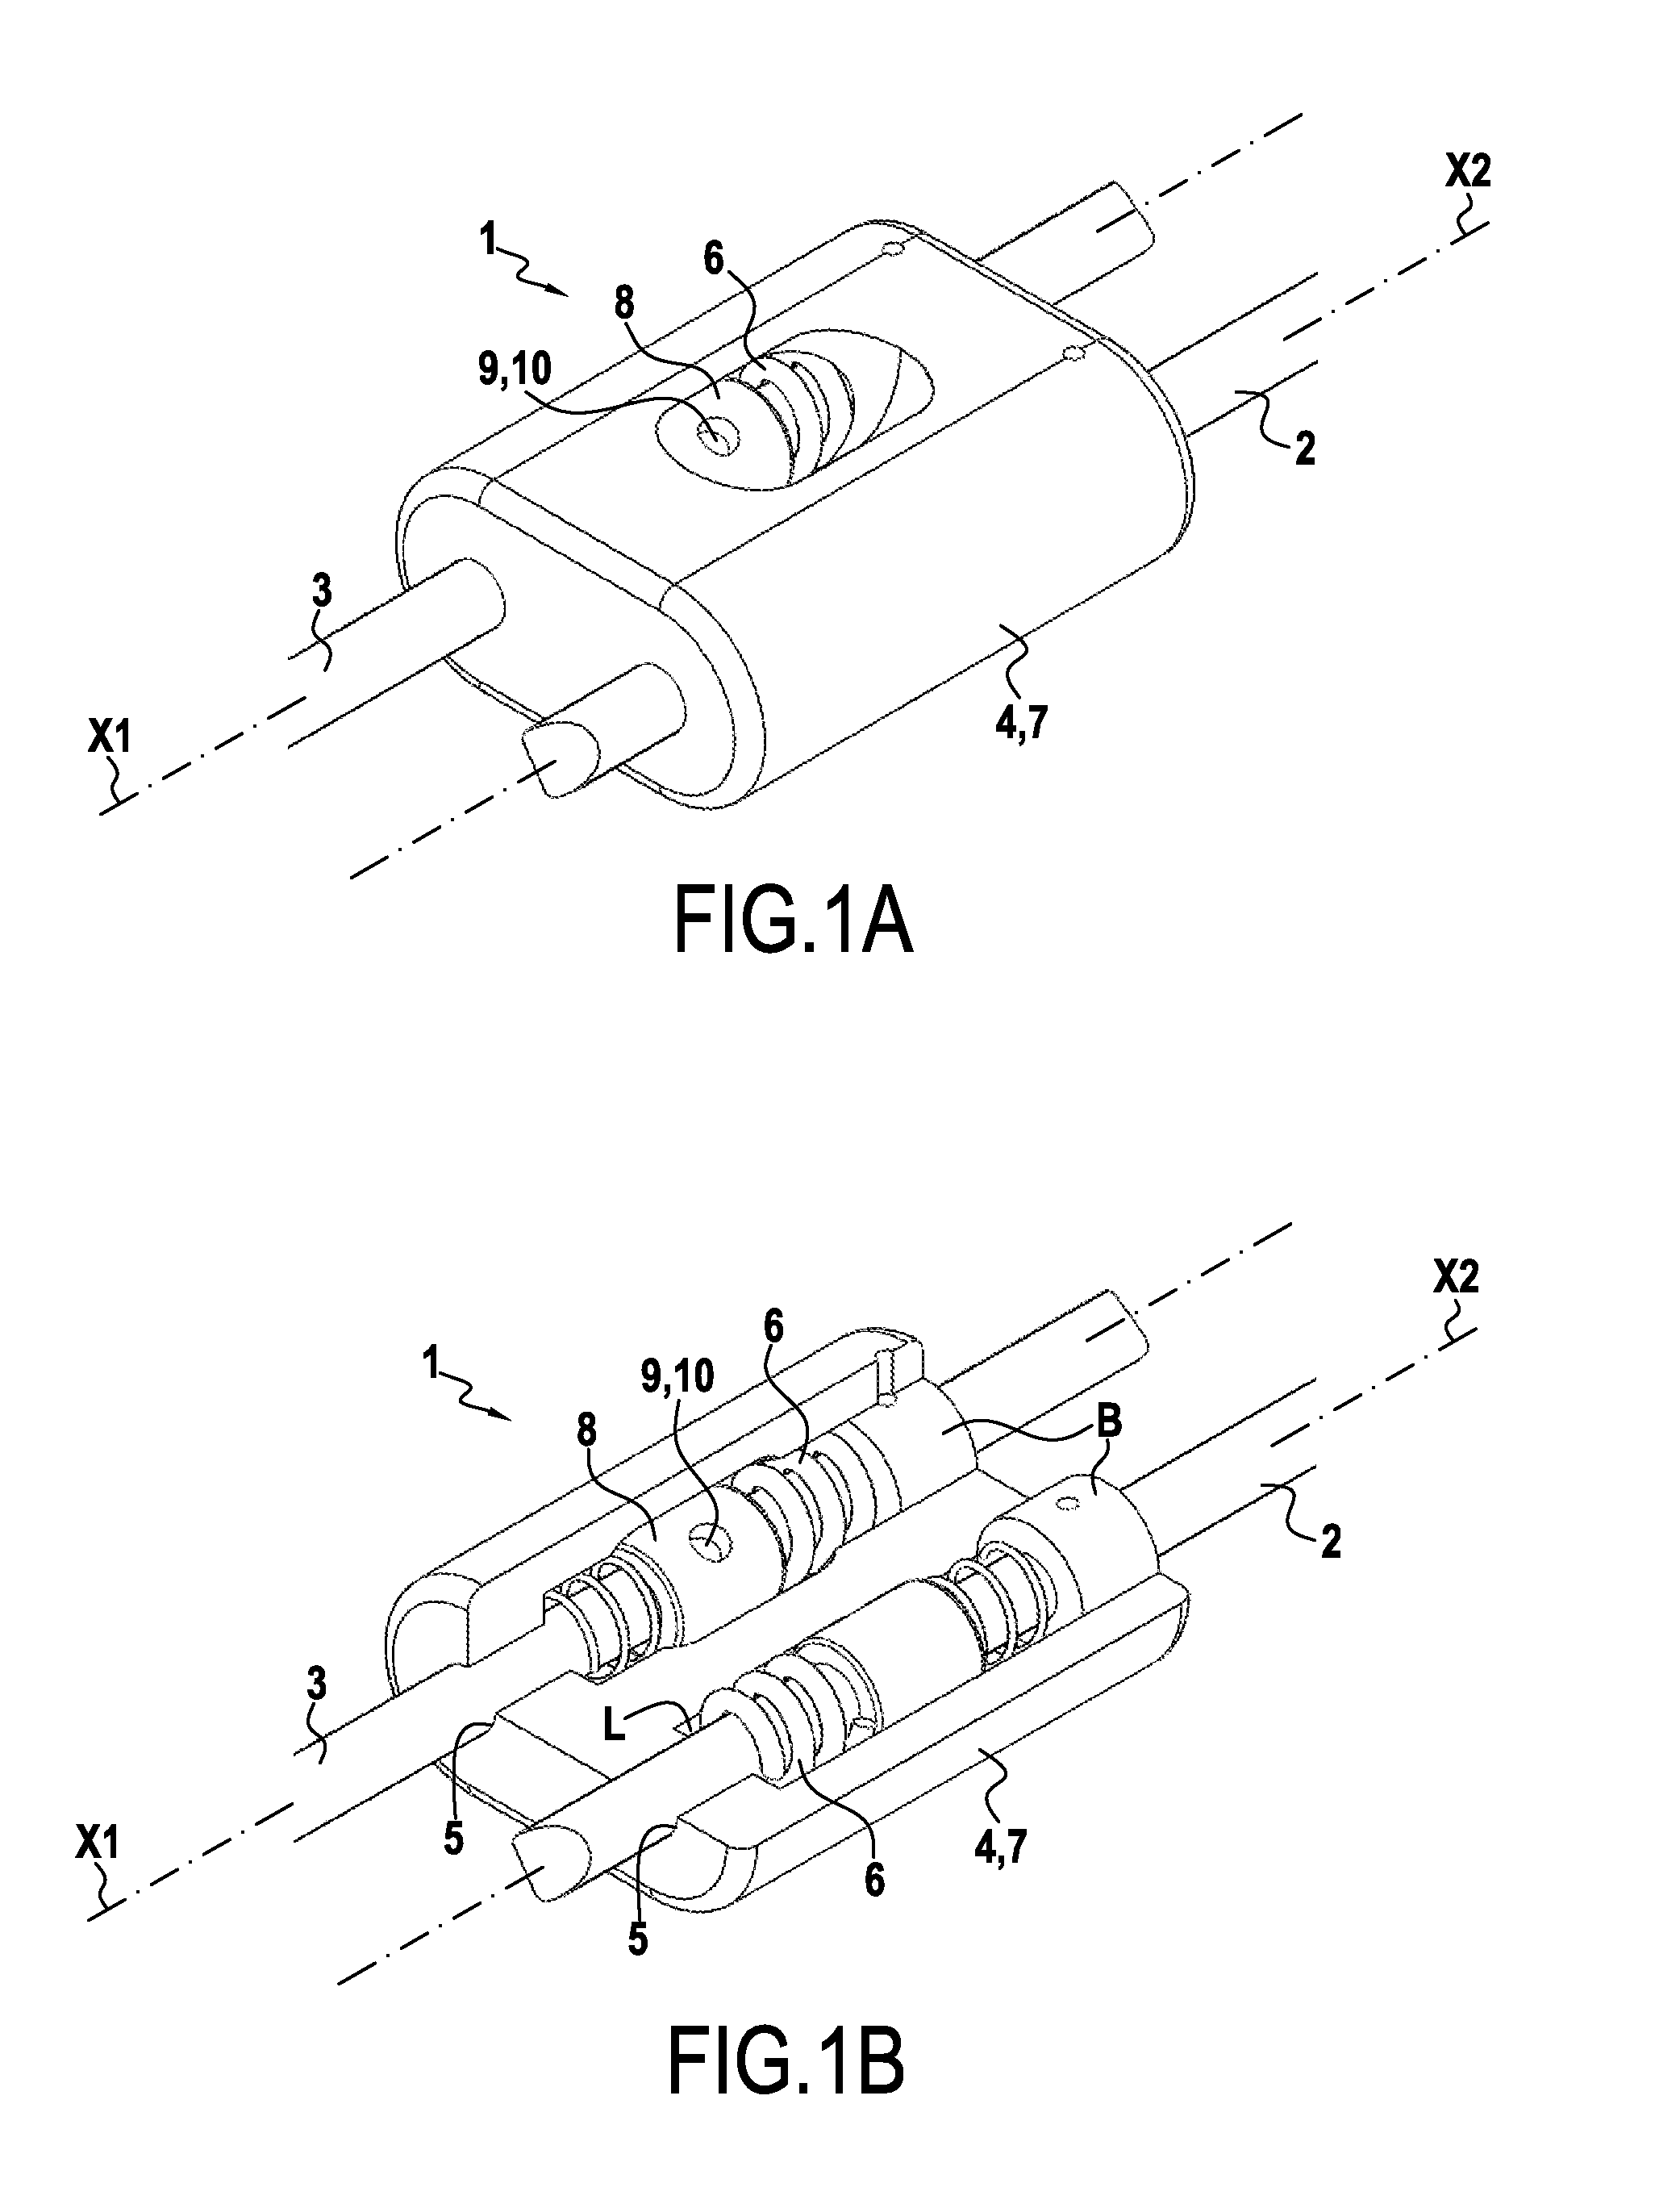 Device for correcting scoliosis and controlling vertebral arthrodesis